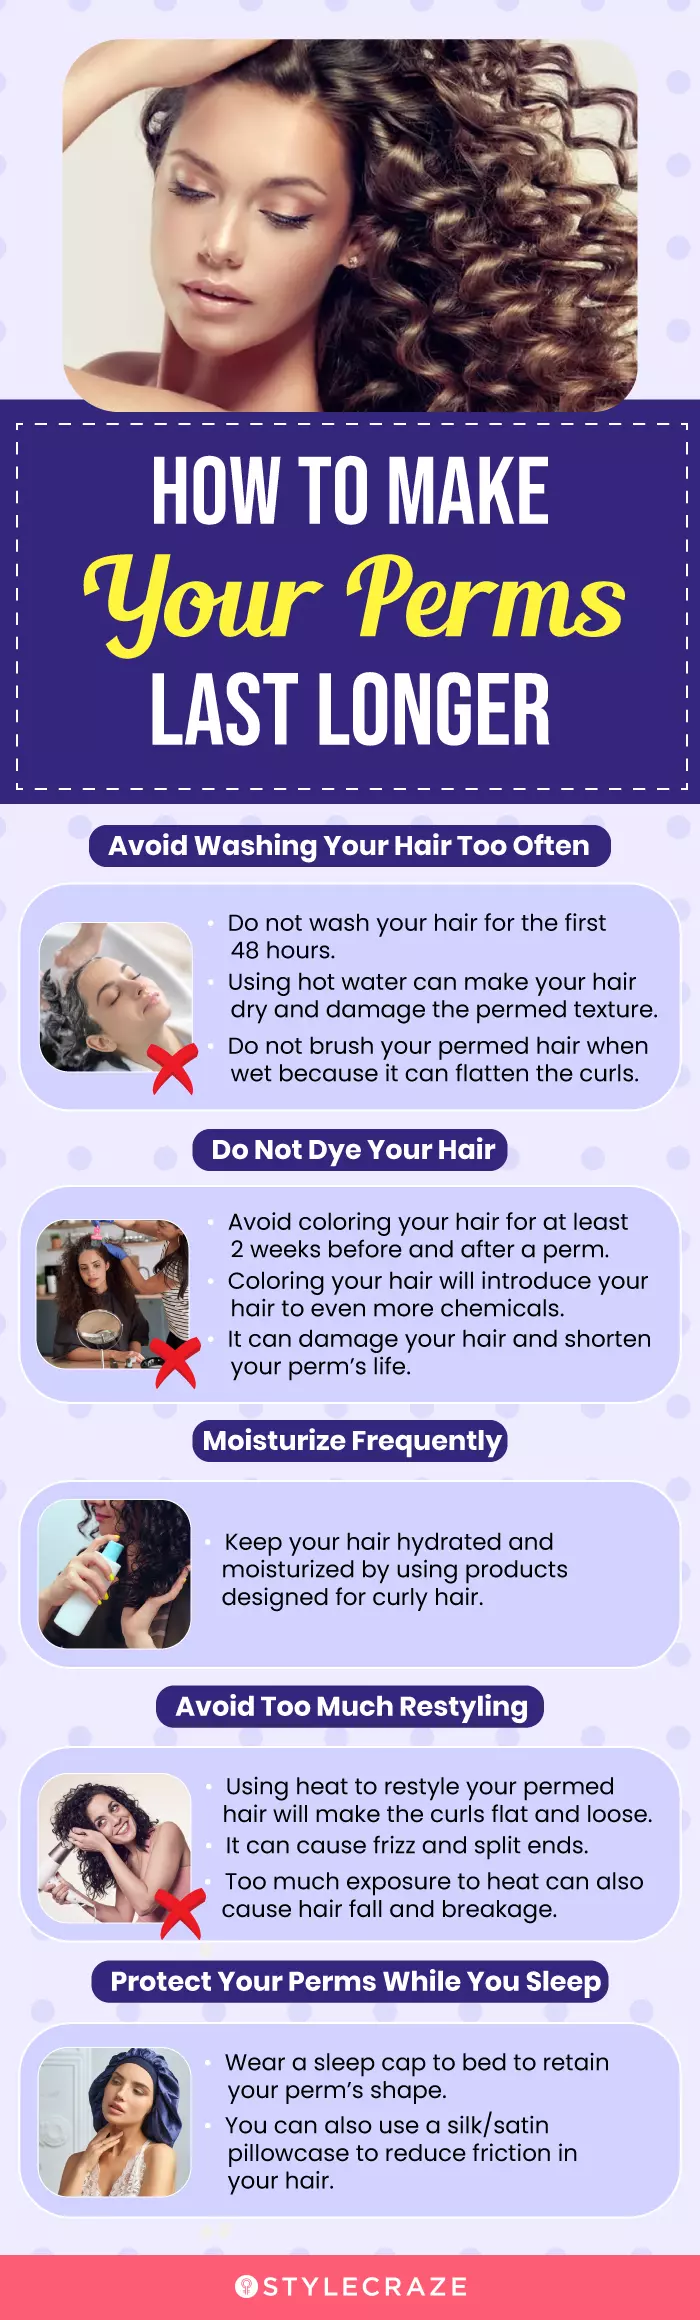 How To Make Your Perms Last Longer (infographic)